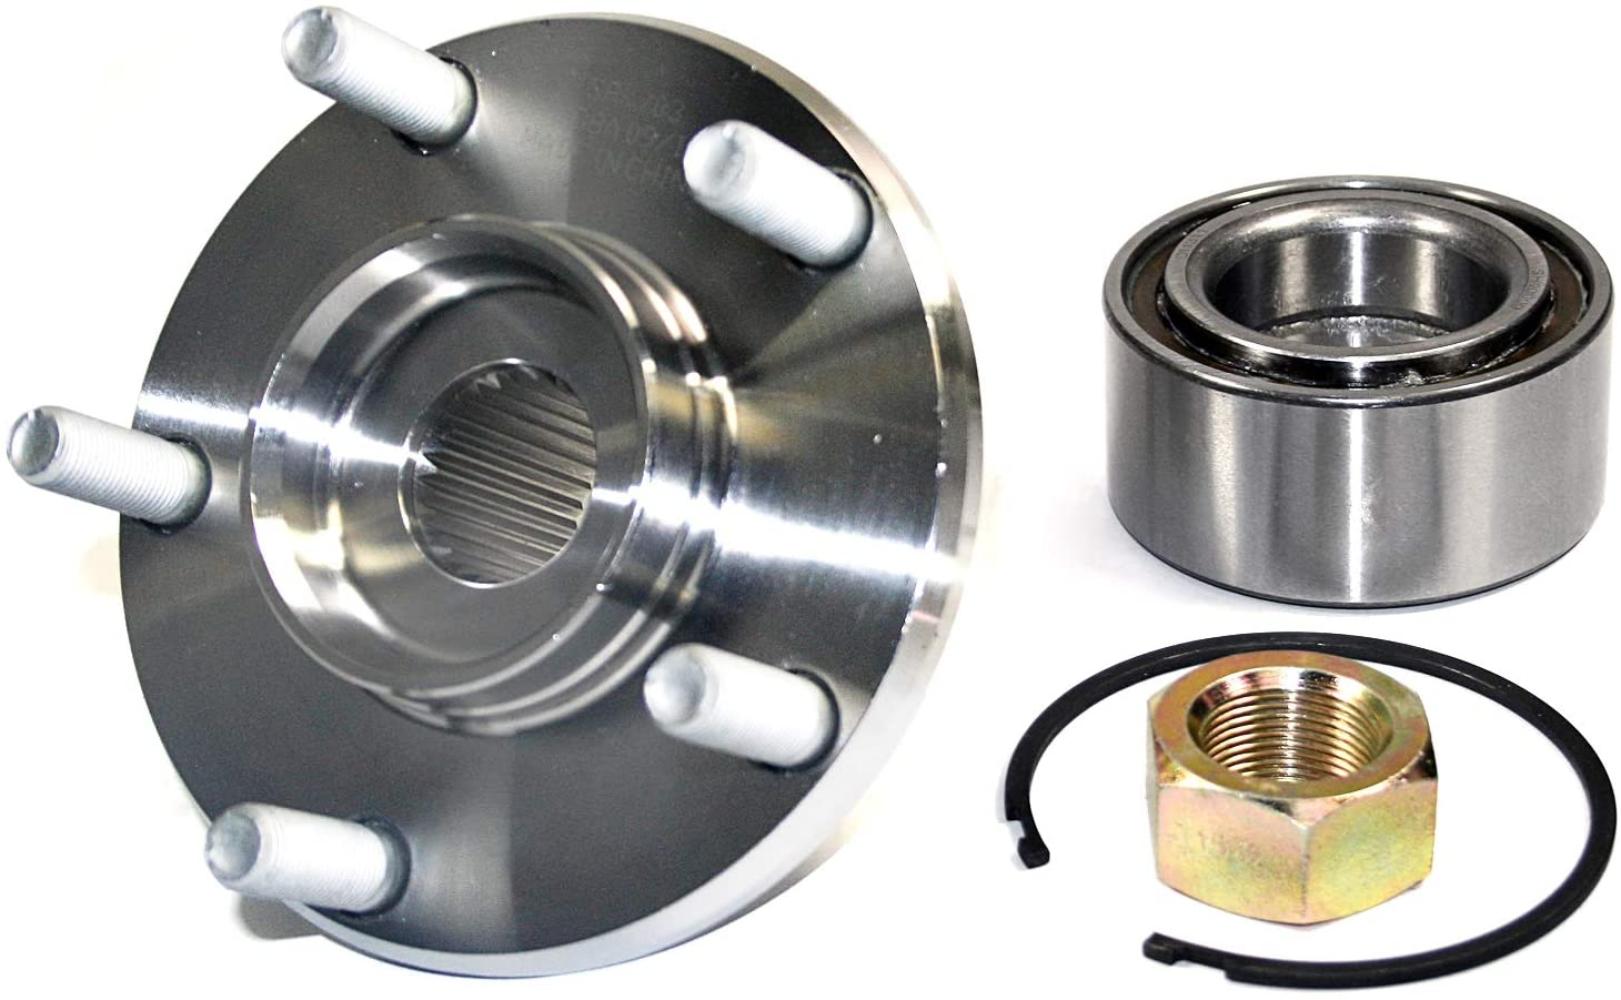 DuraGo 29596002 Front Wheel Hub Kit, Wheel Hub Repair Kits include all of the components required to restore the wheel hub and bearing to optimum condition By Brand DuraGo - image 3 of 4